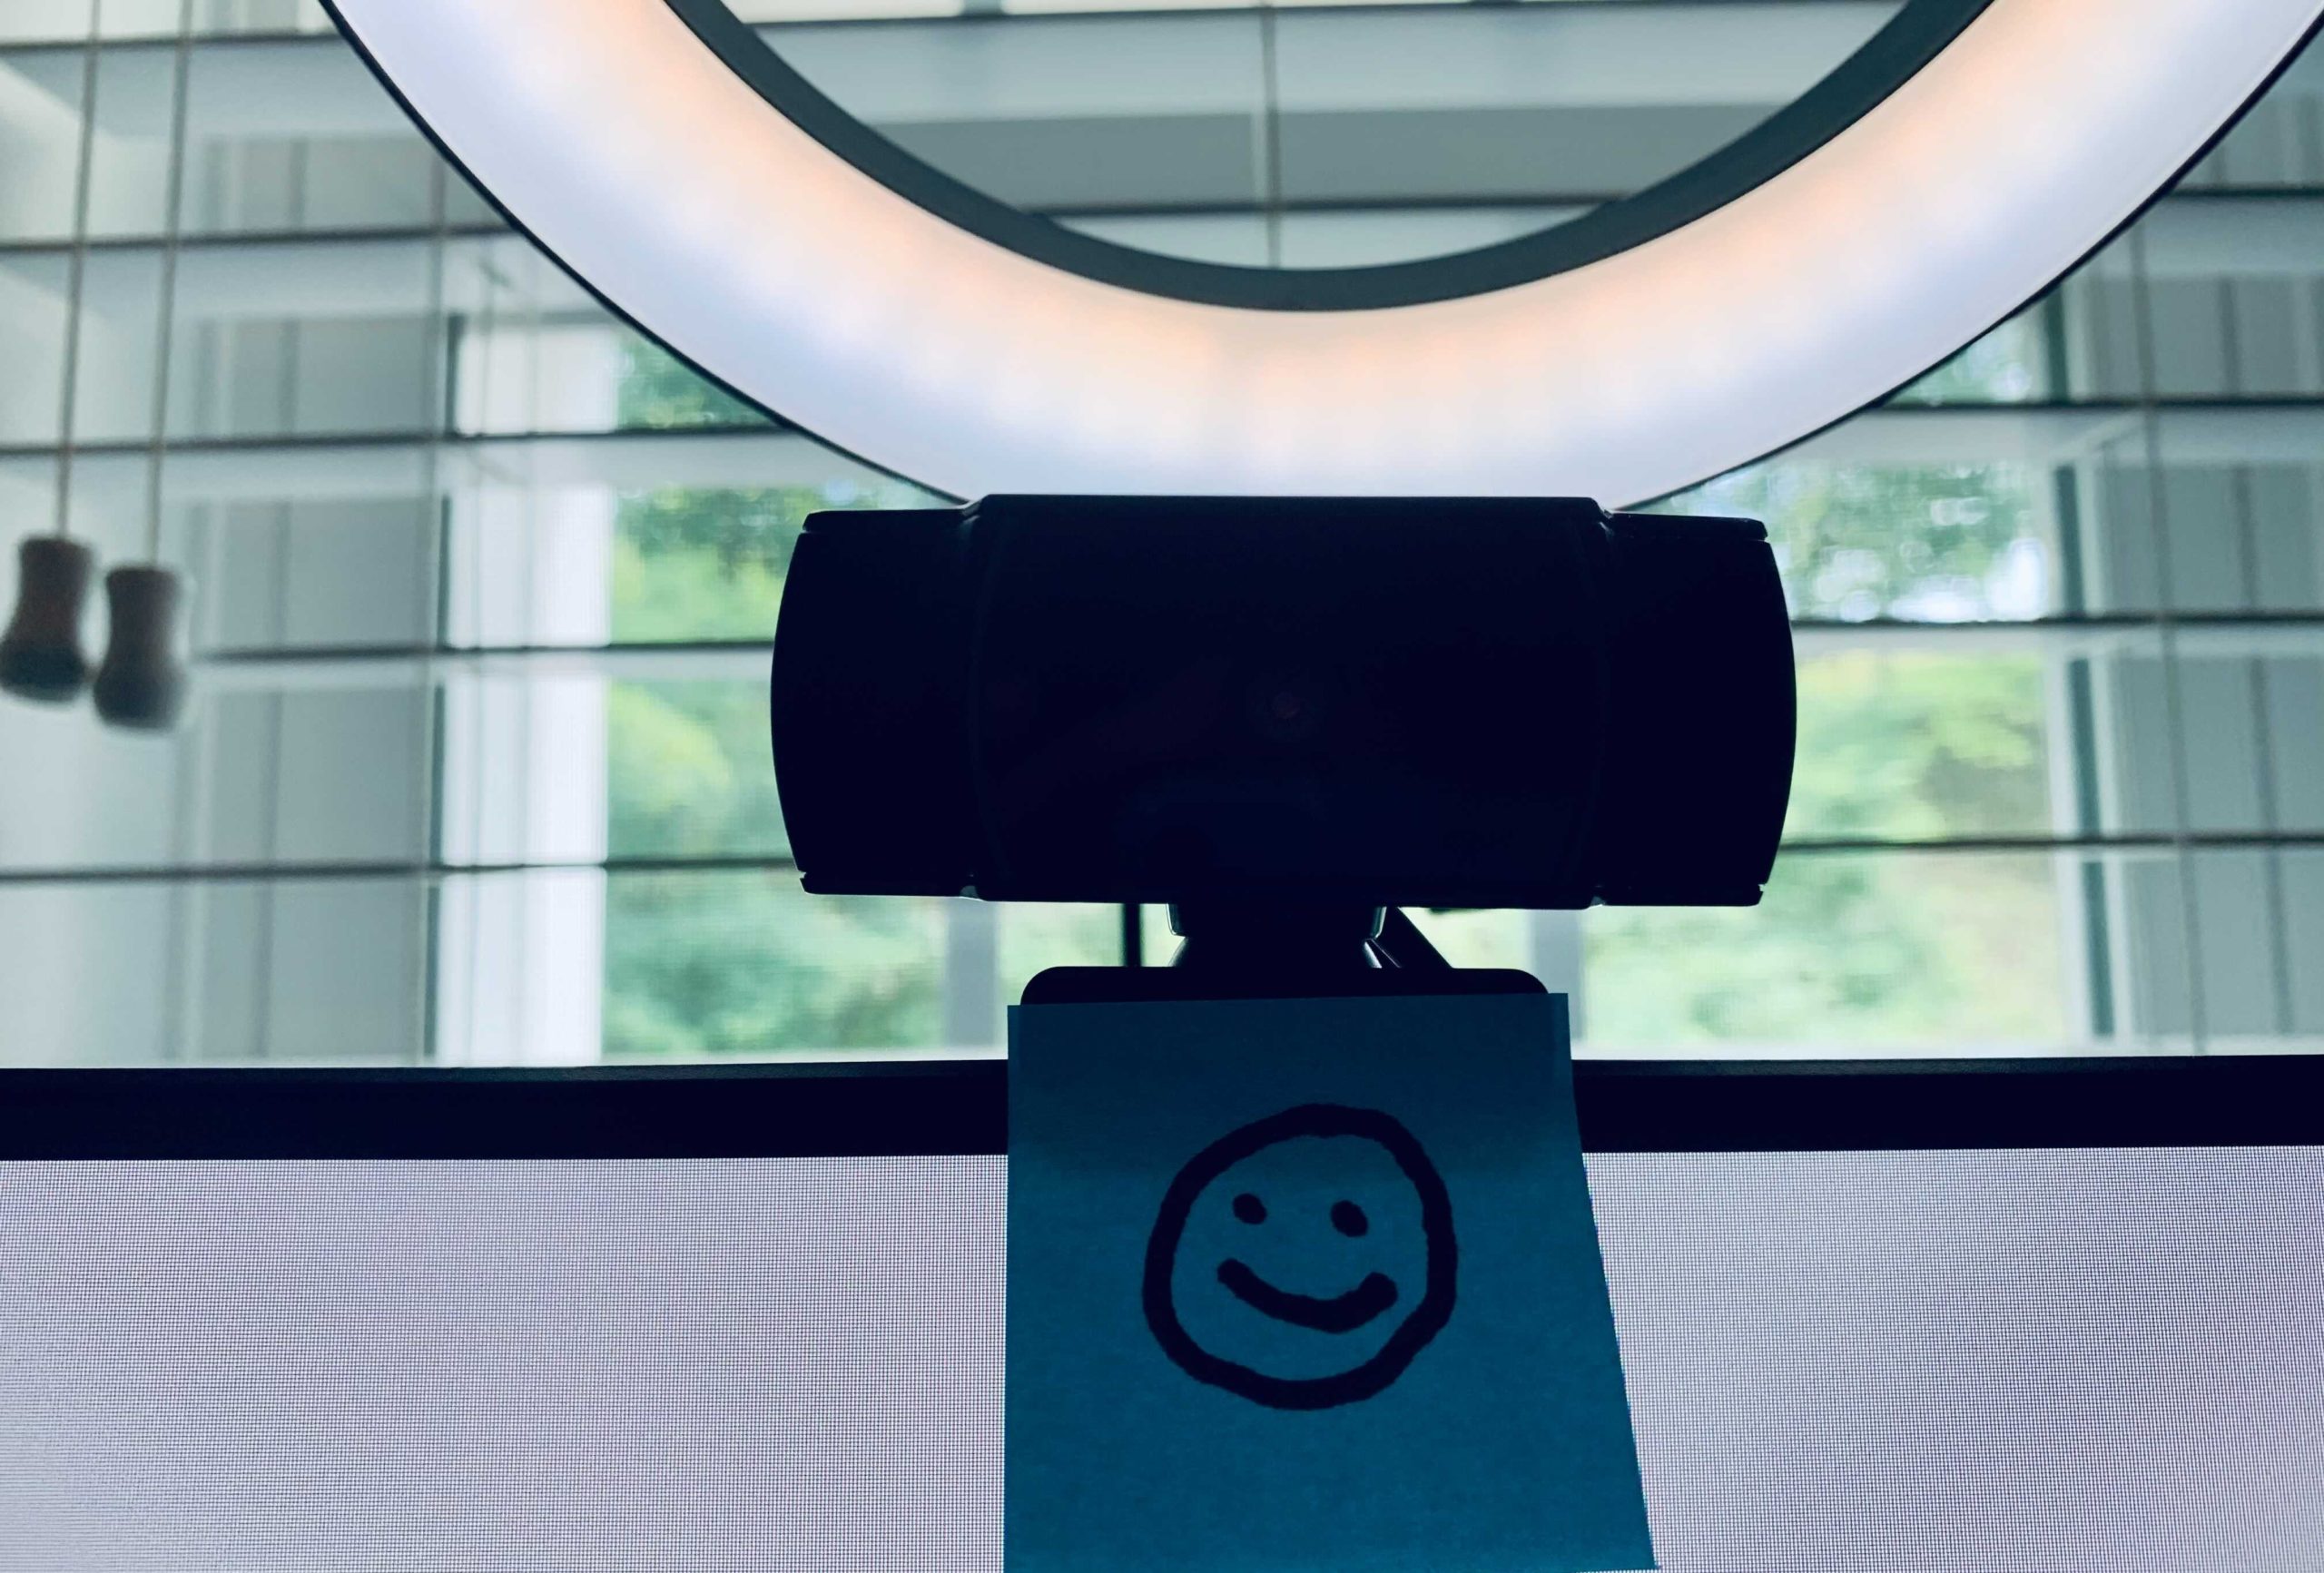 photo of a web cam with a sticky note containing a smiley face just below it